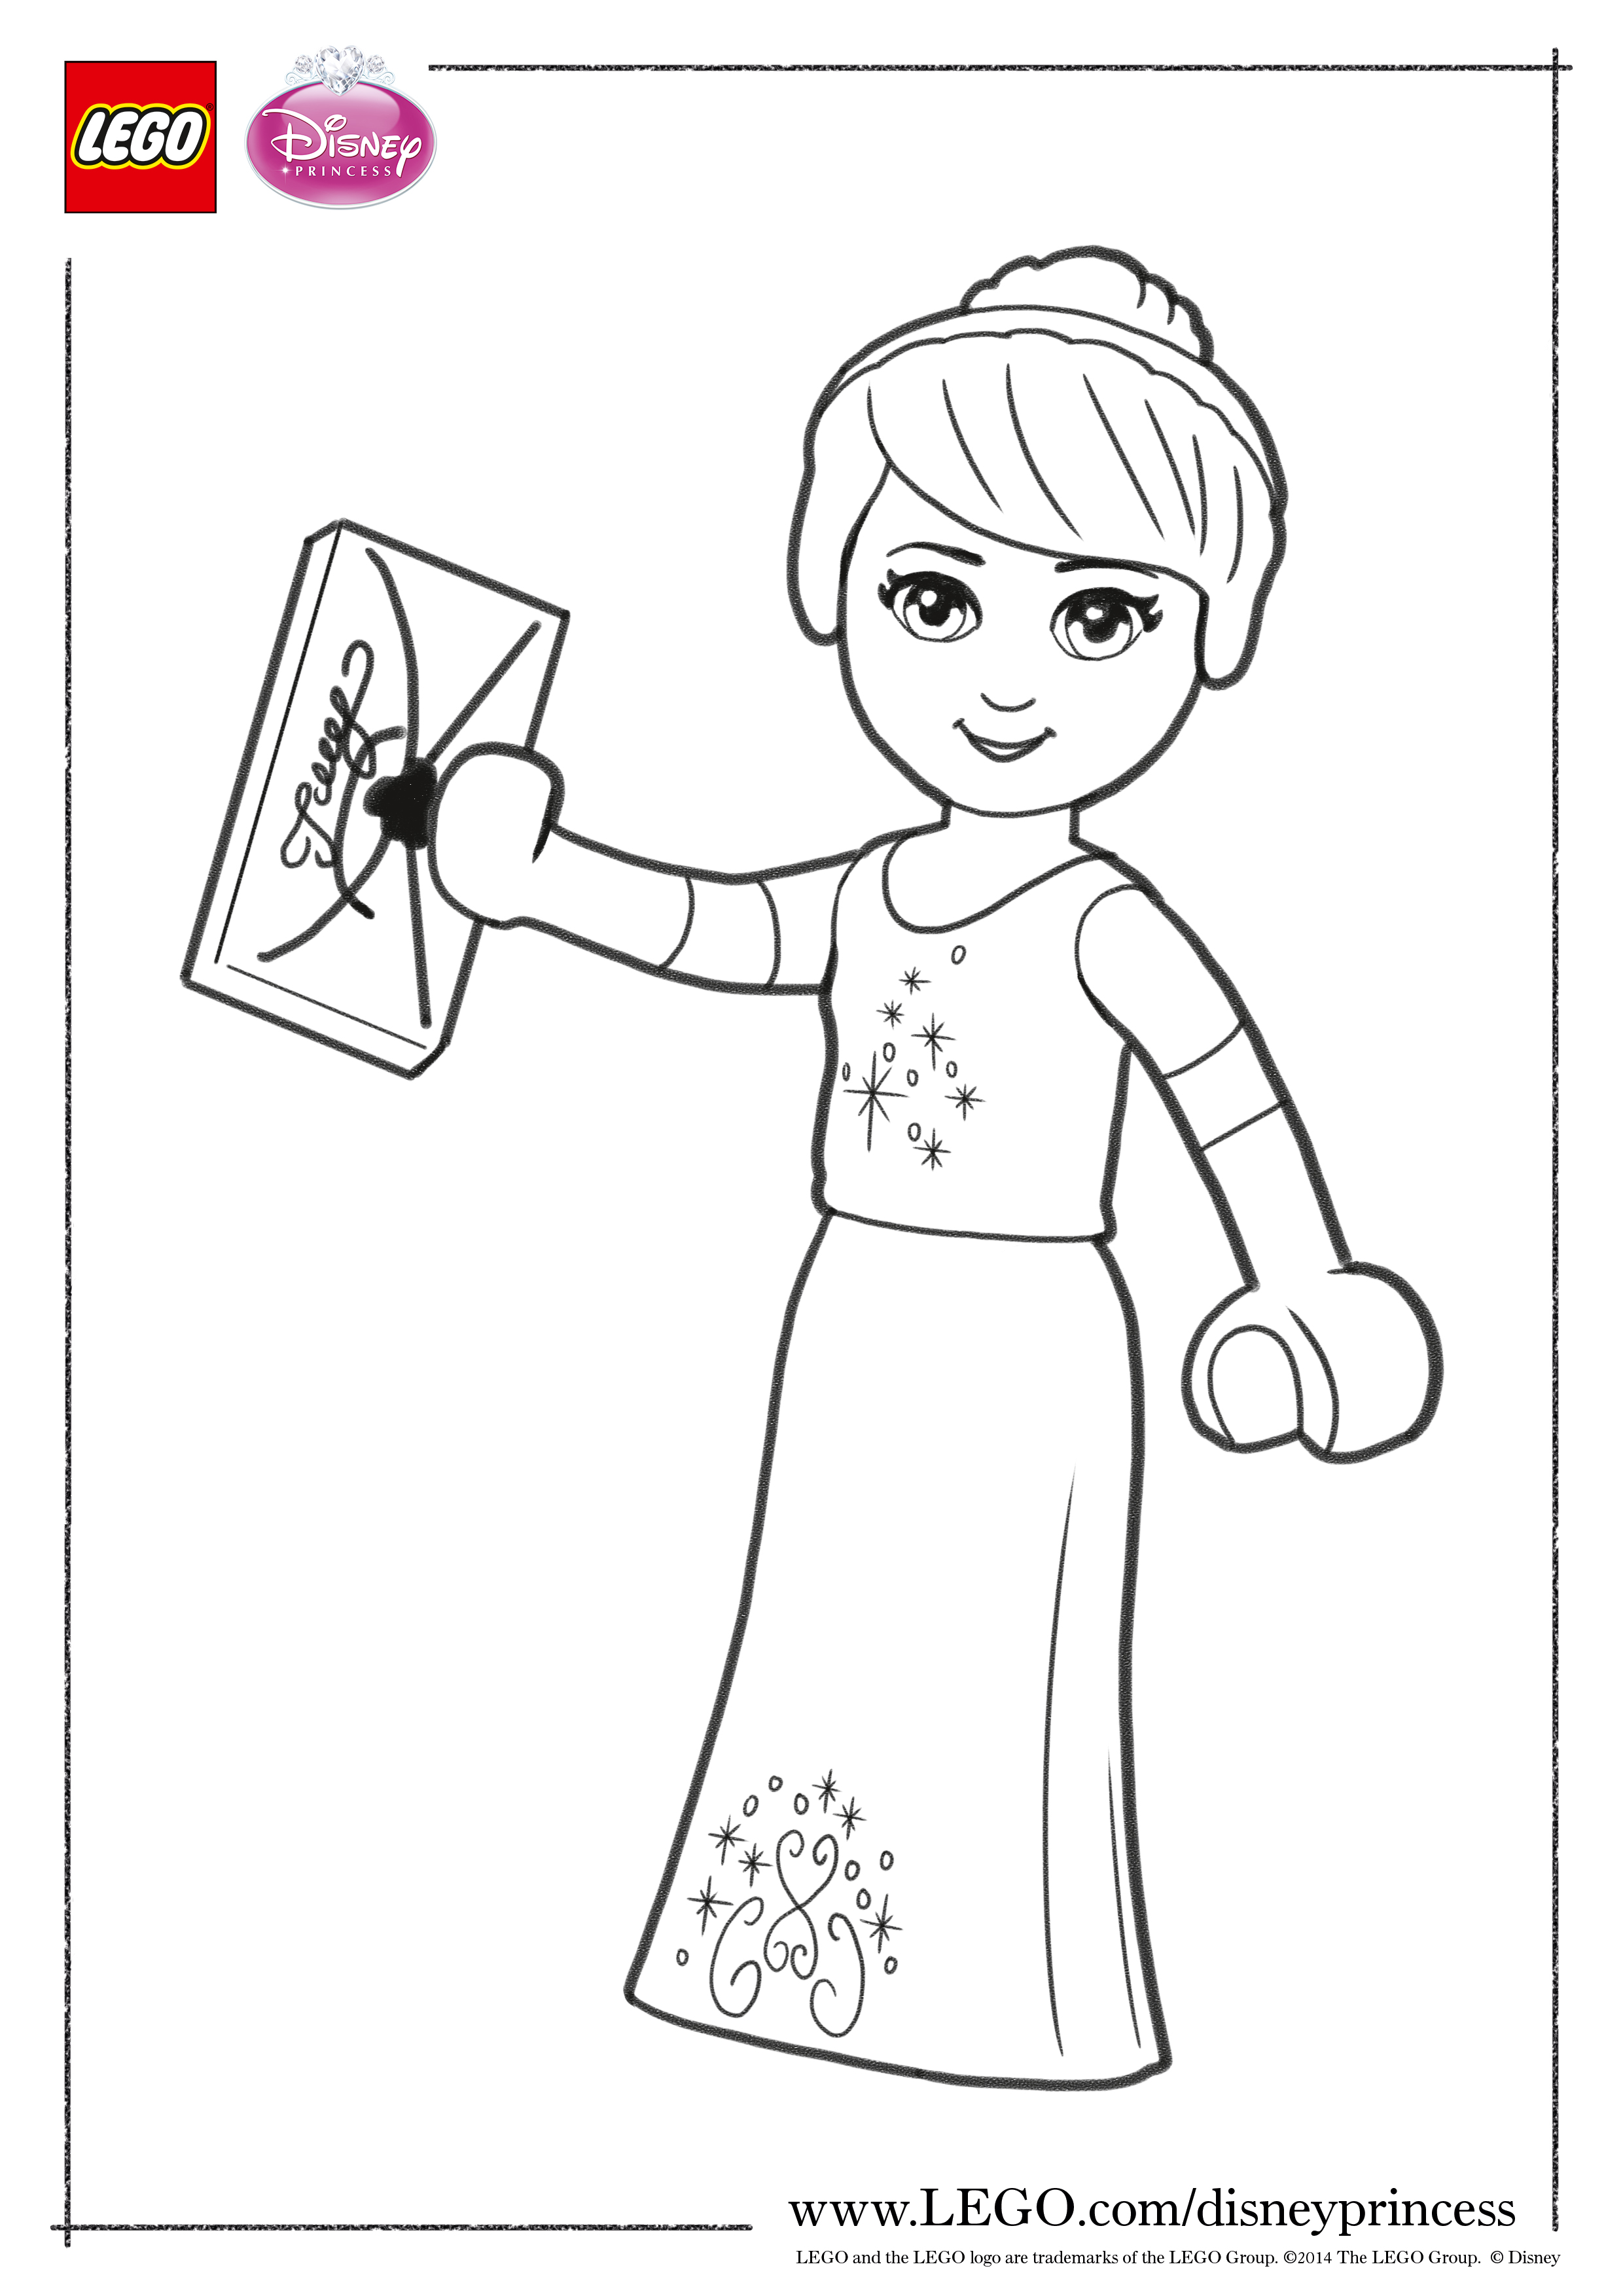 Lego Disney Princess Coloring Pages The Family Brick